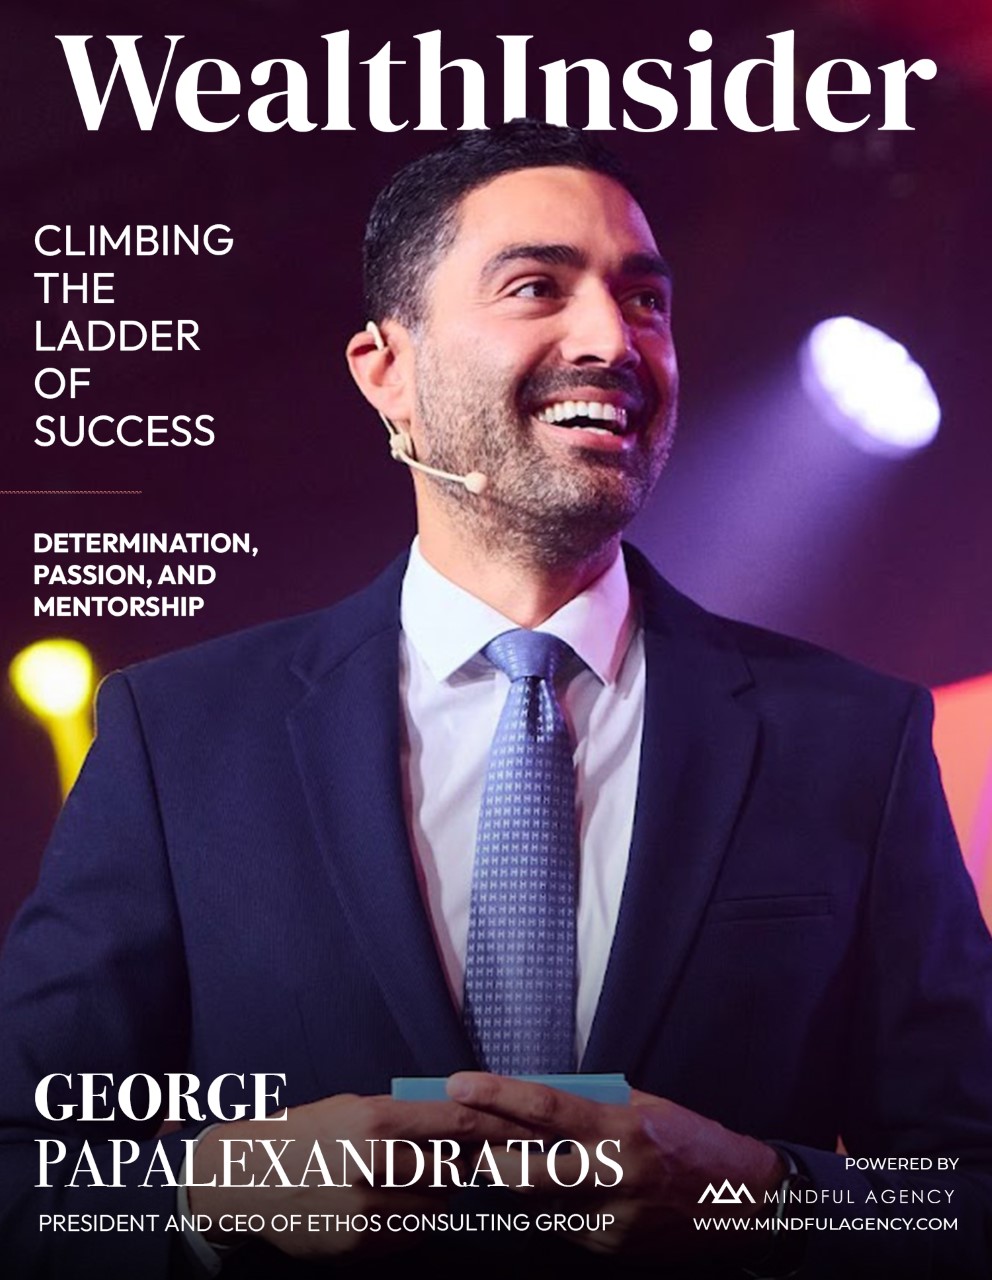 George Papalexandratos on cover of Wealth Insider